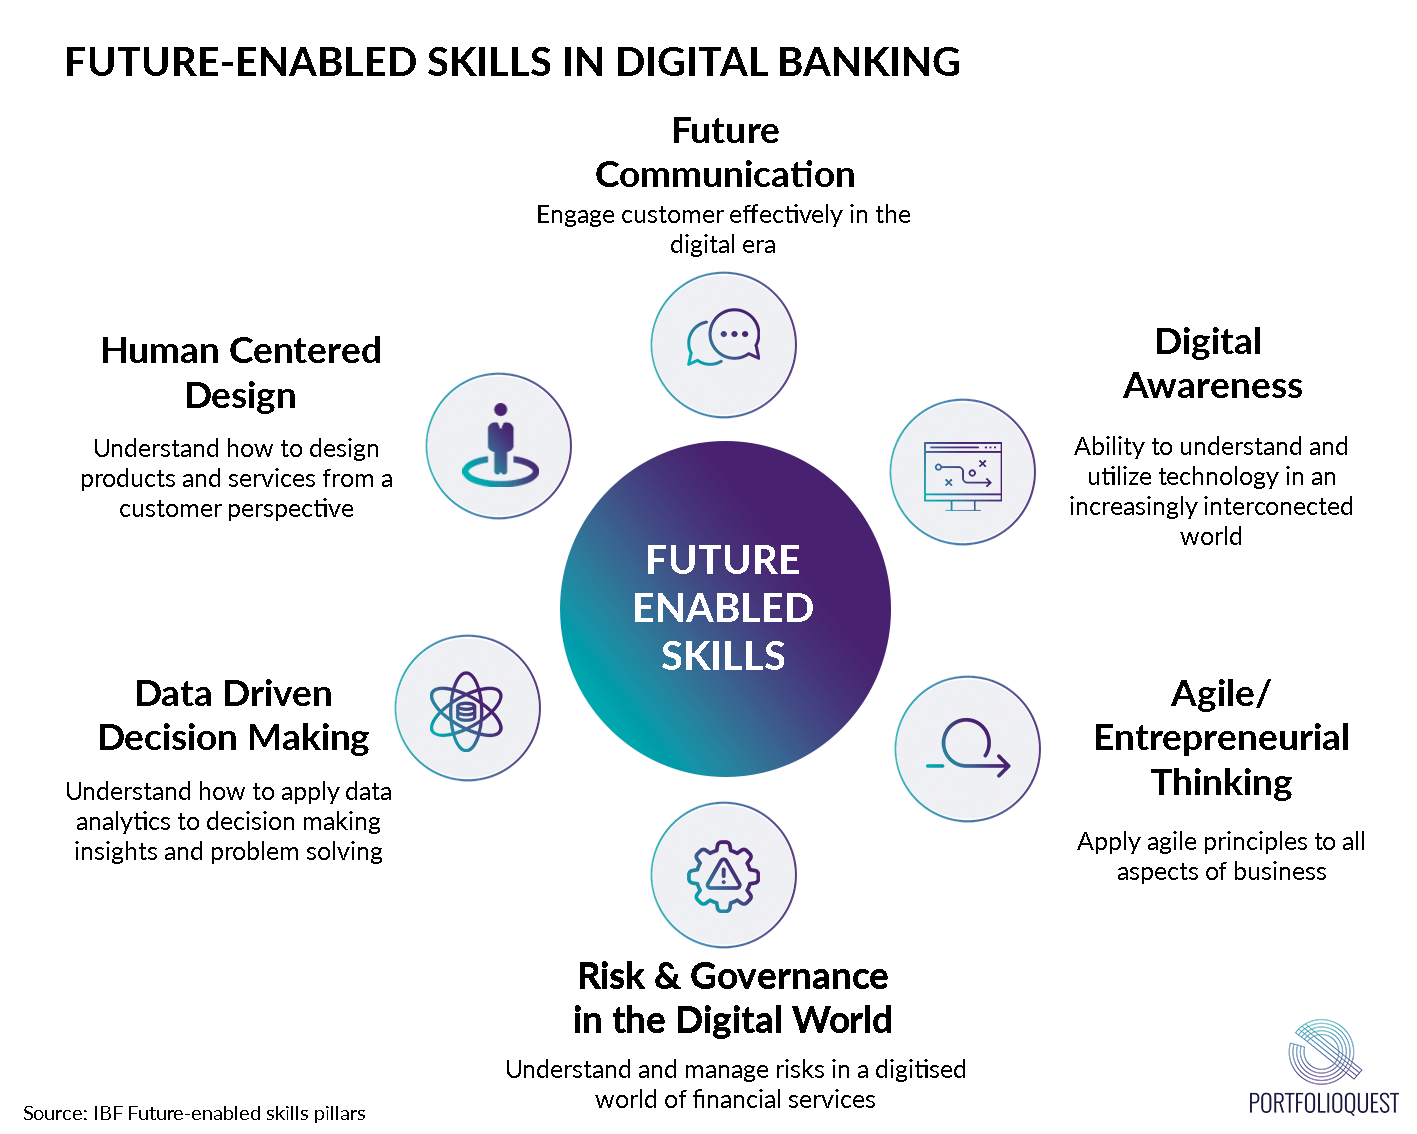 Skills for the digital economy exemplified by banking